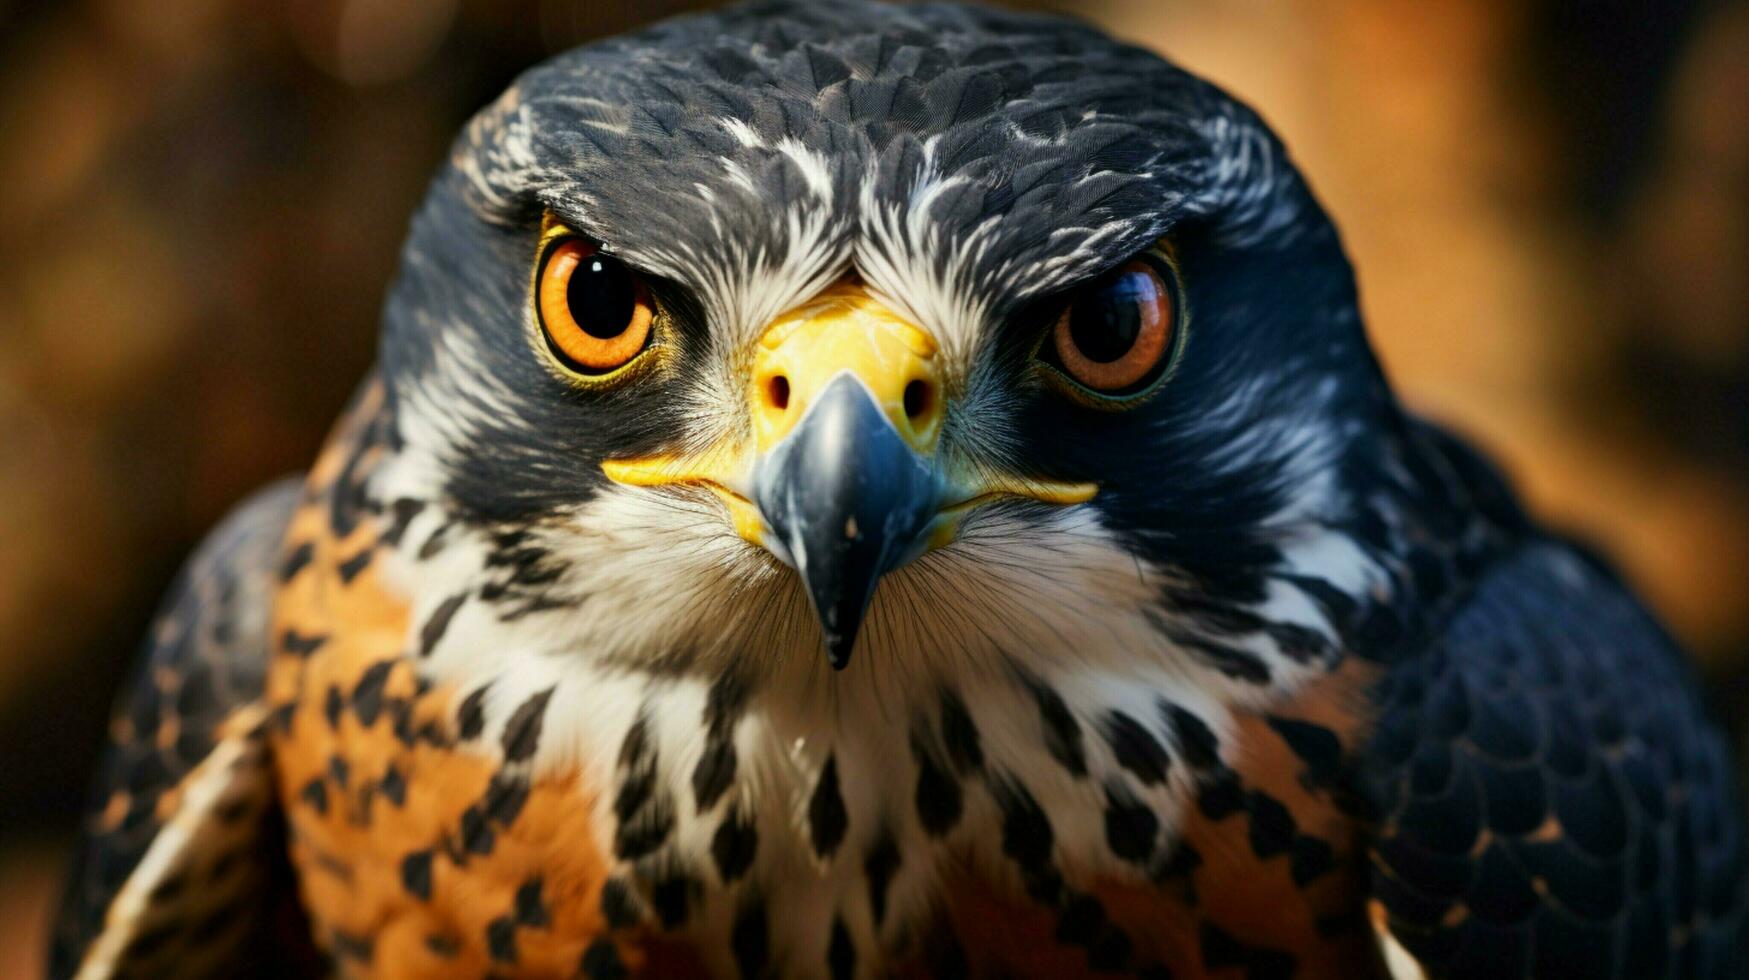 majestic falcon staring with sharp talons in focus photo